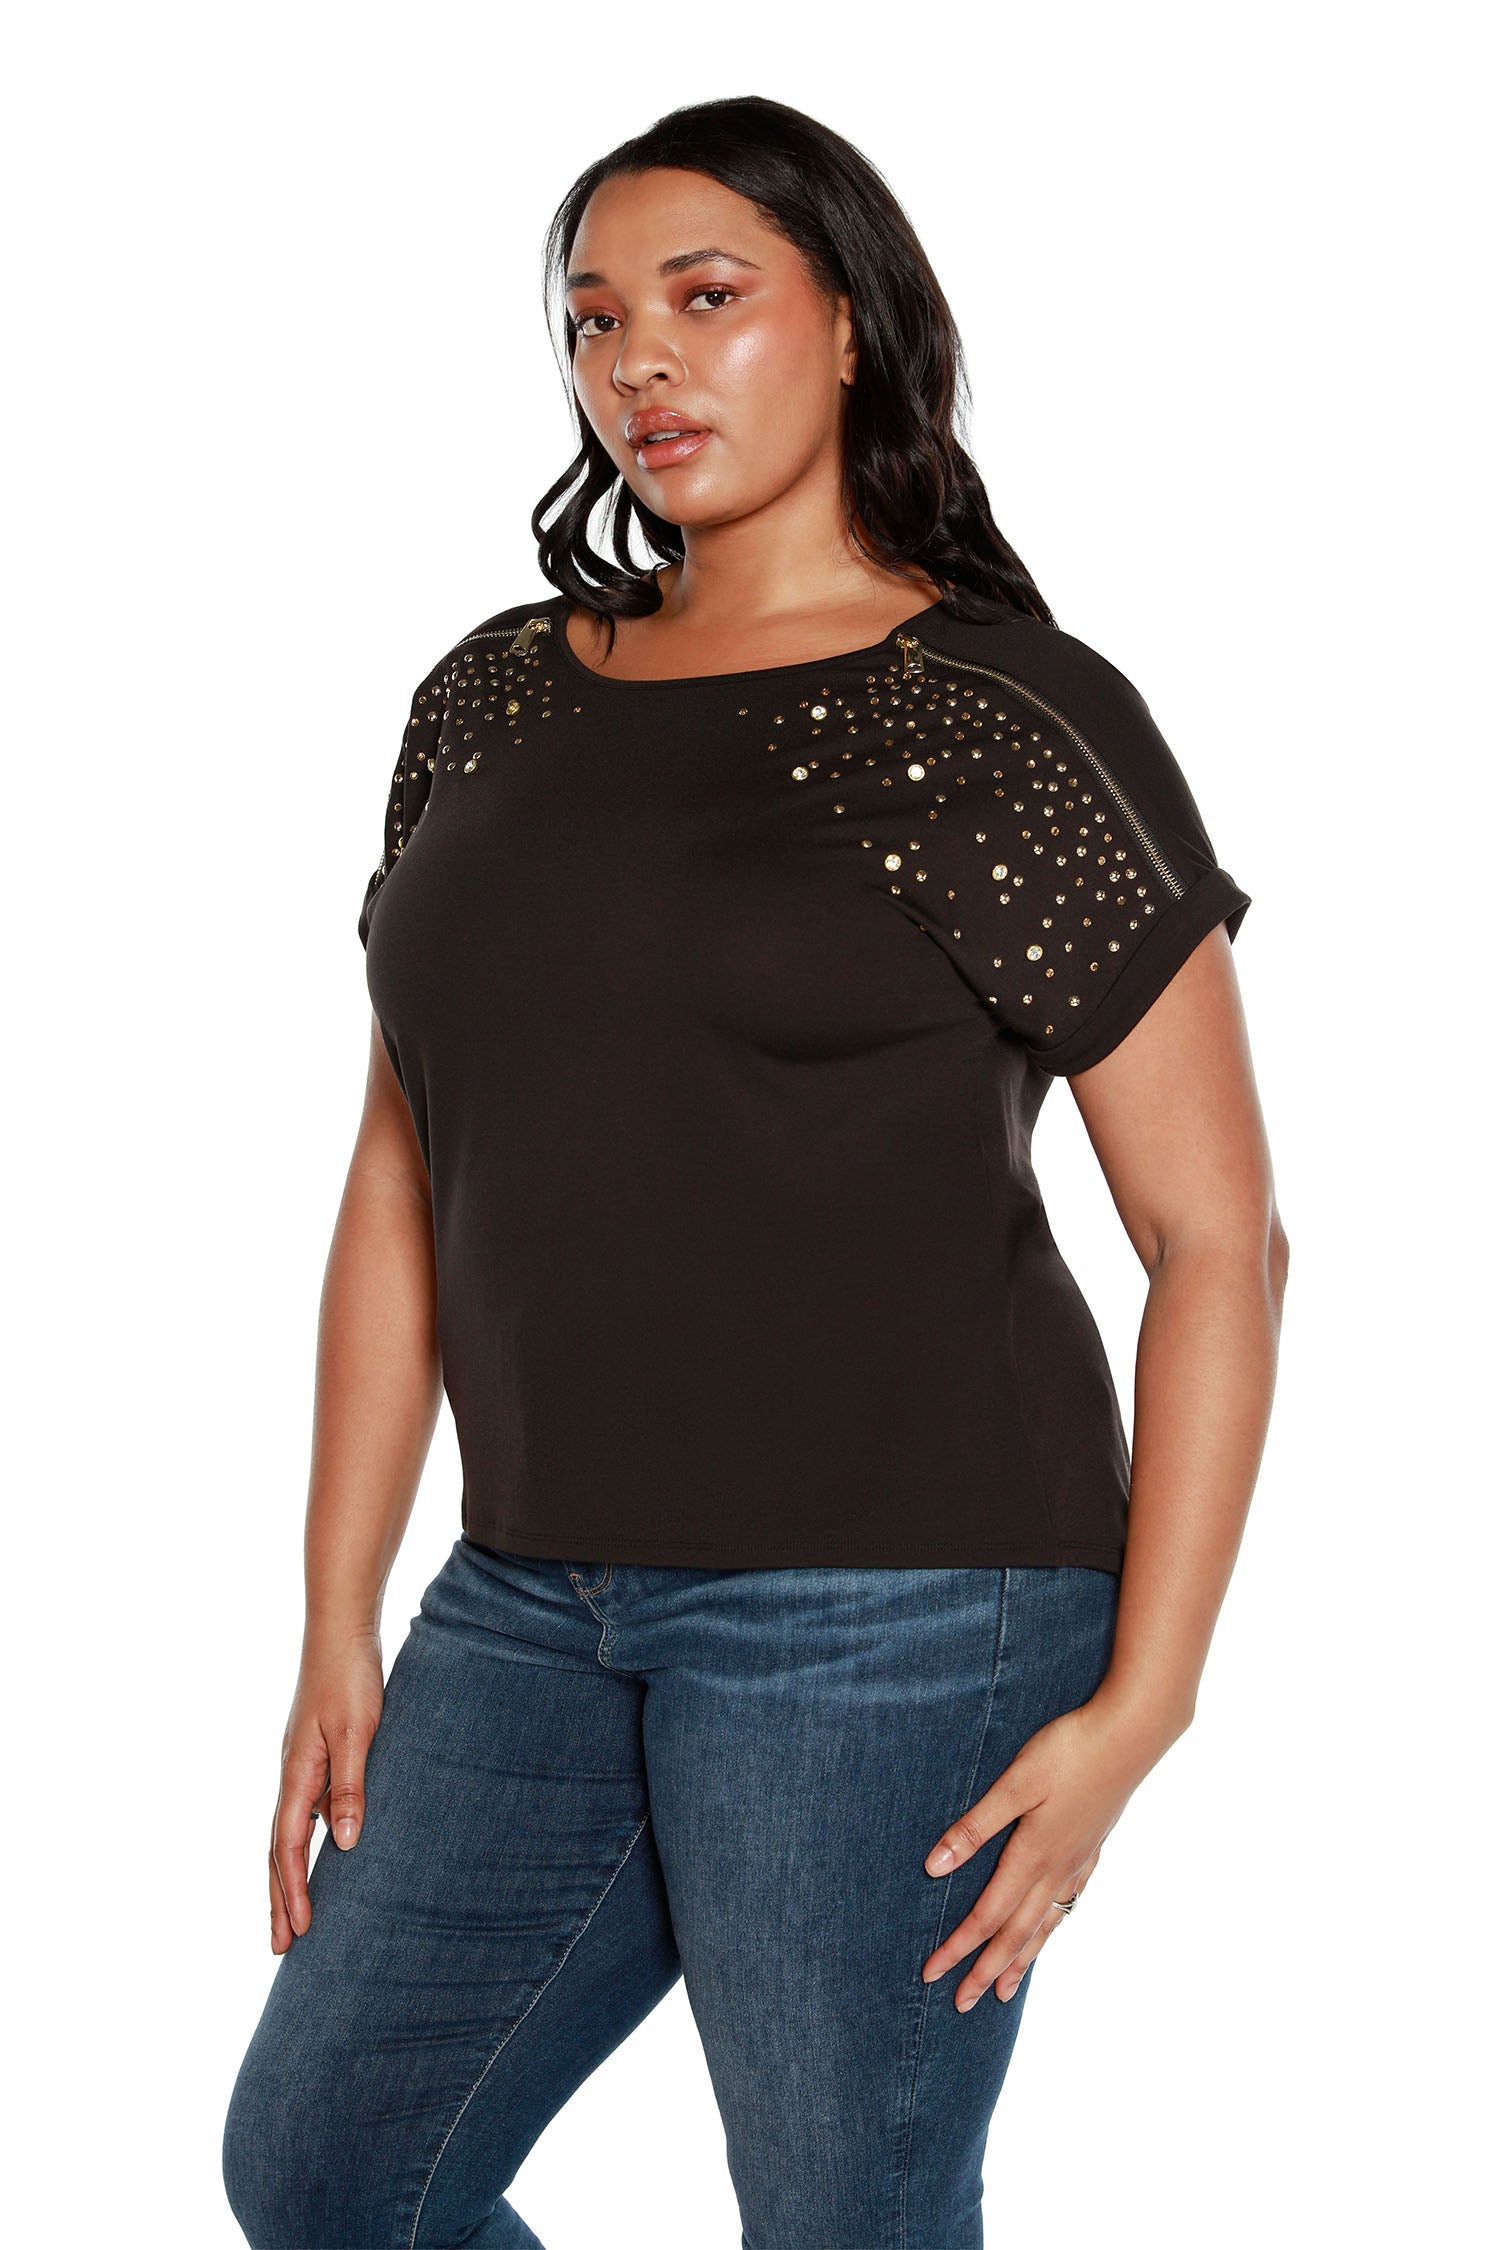 Women's Cap Sleeve Top with Zippers, Rhinestone and Stud Embellishments | Curvy